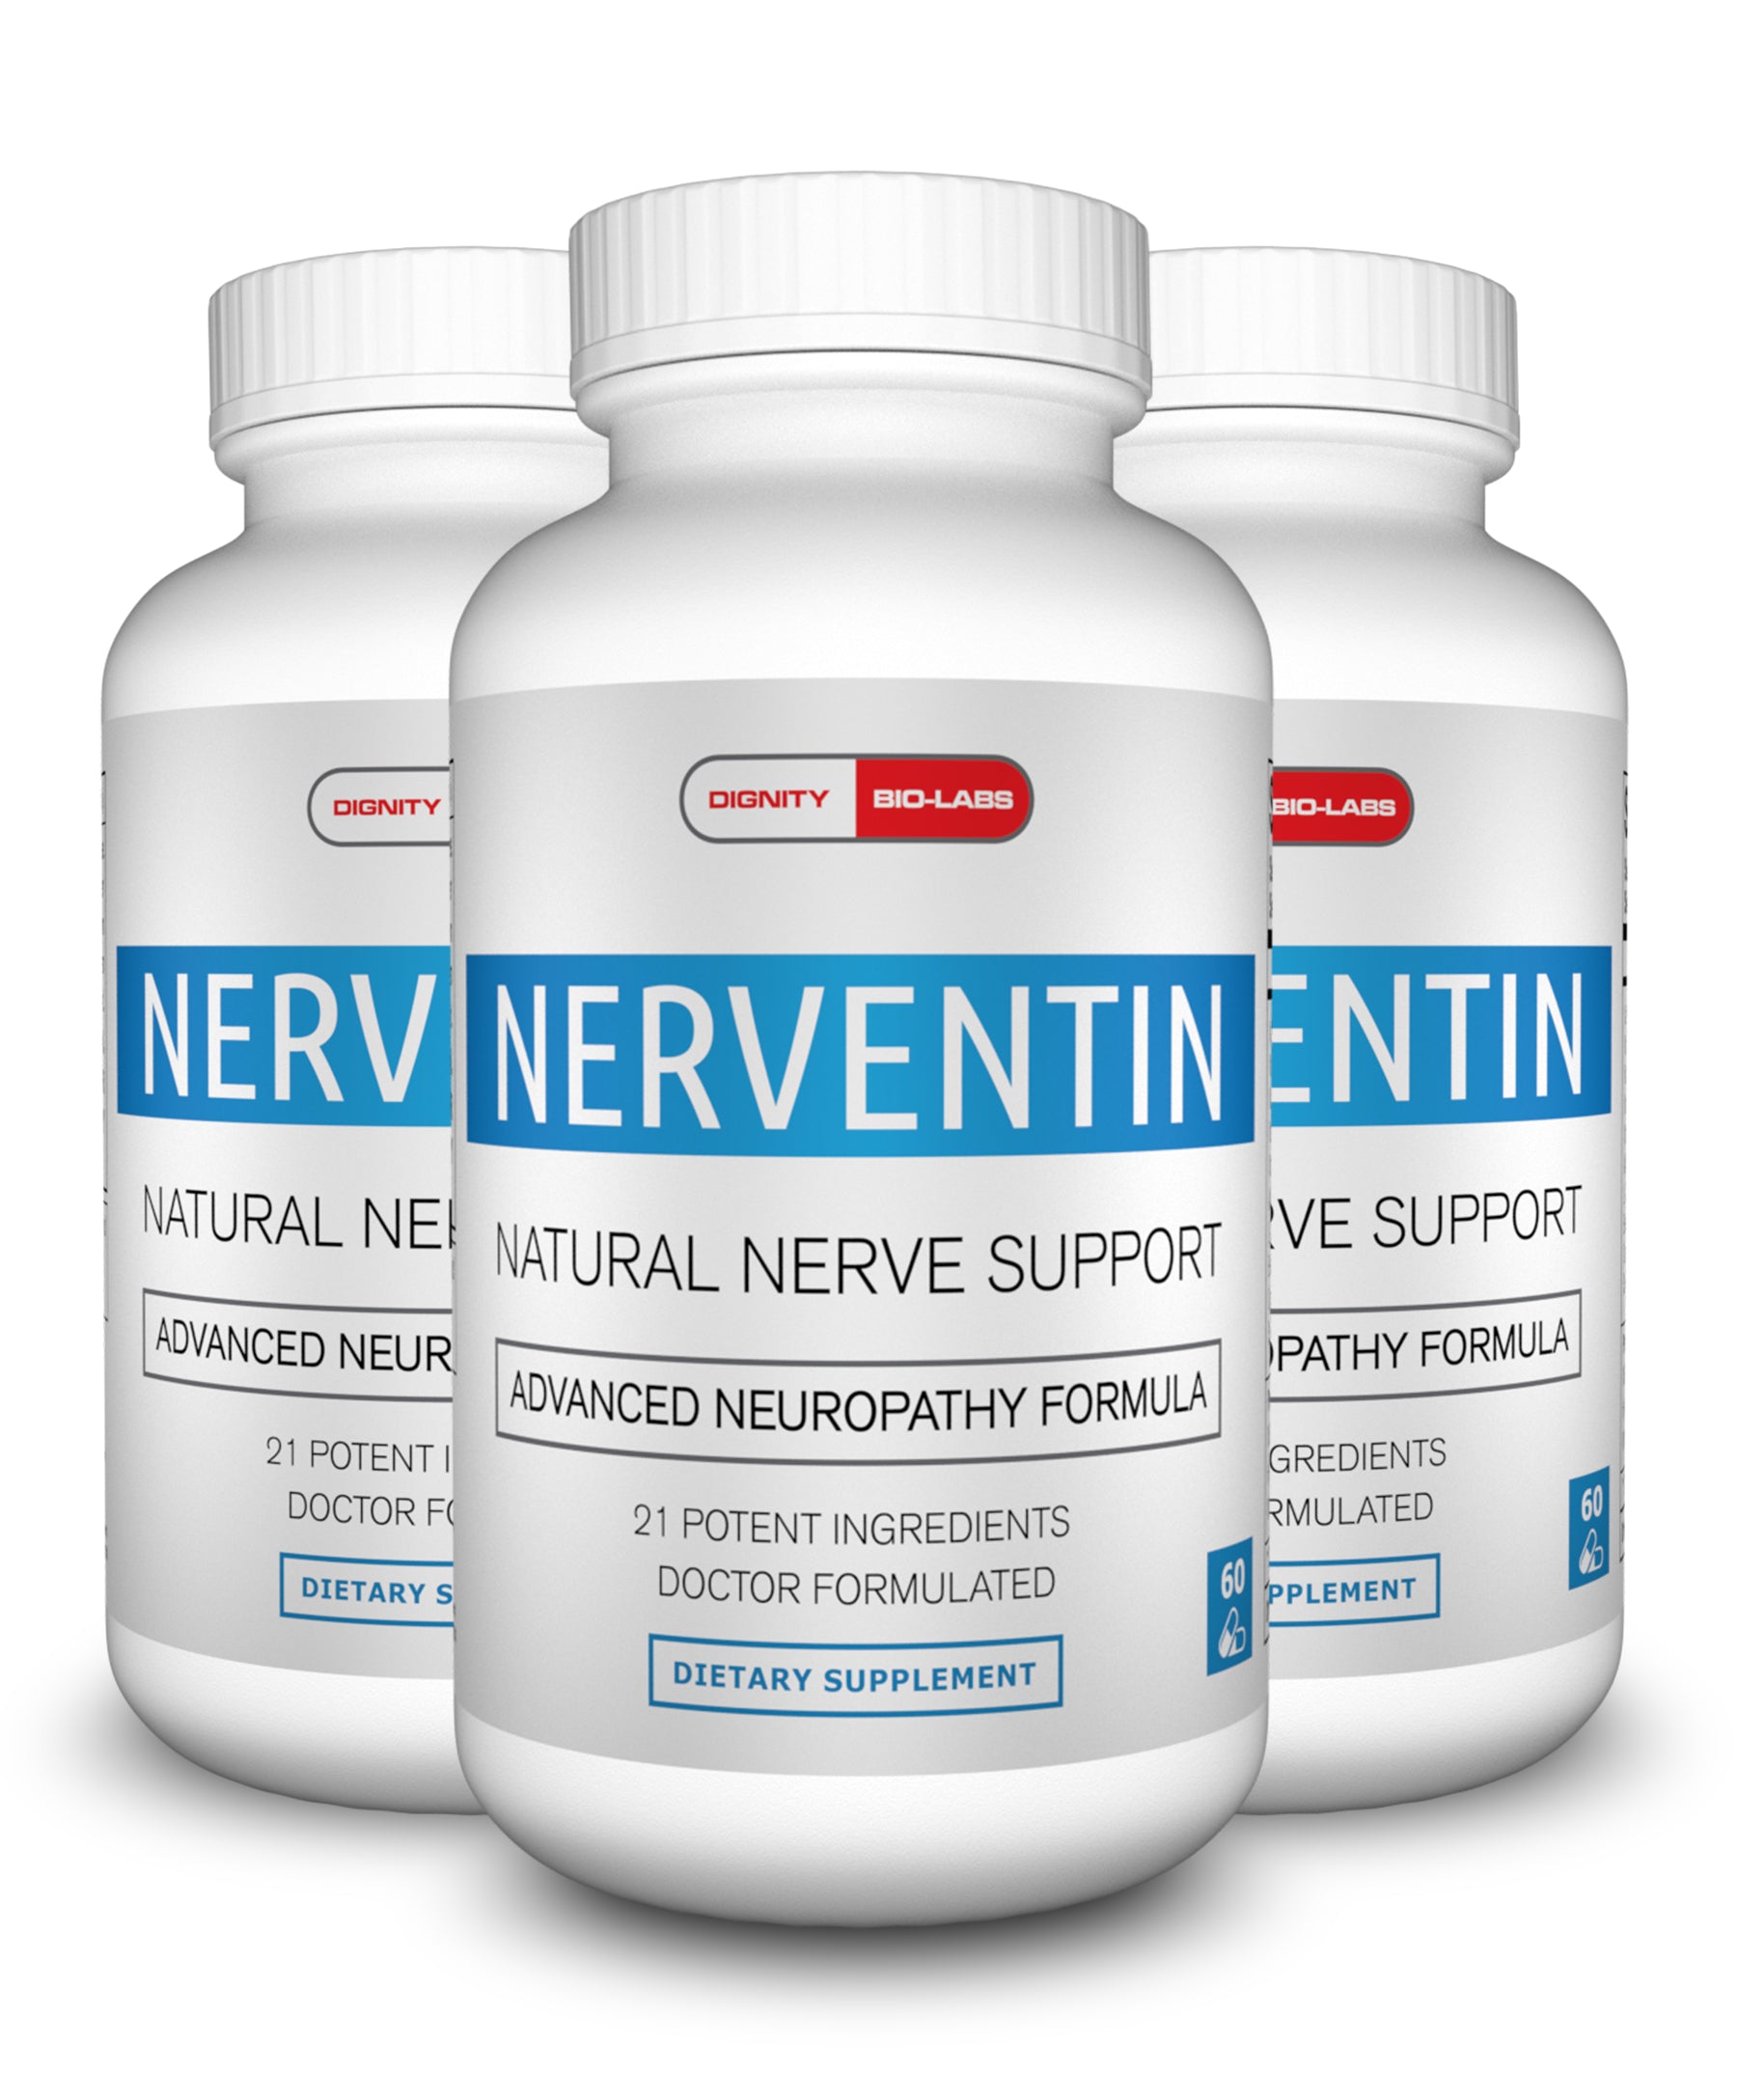 Nerventin Nerve Support - OUT OF STOCK